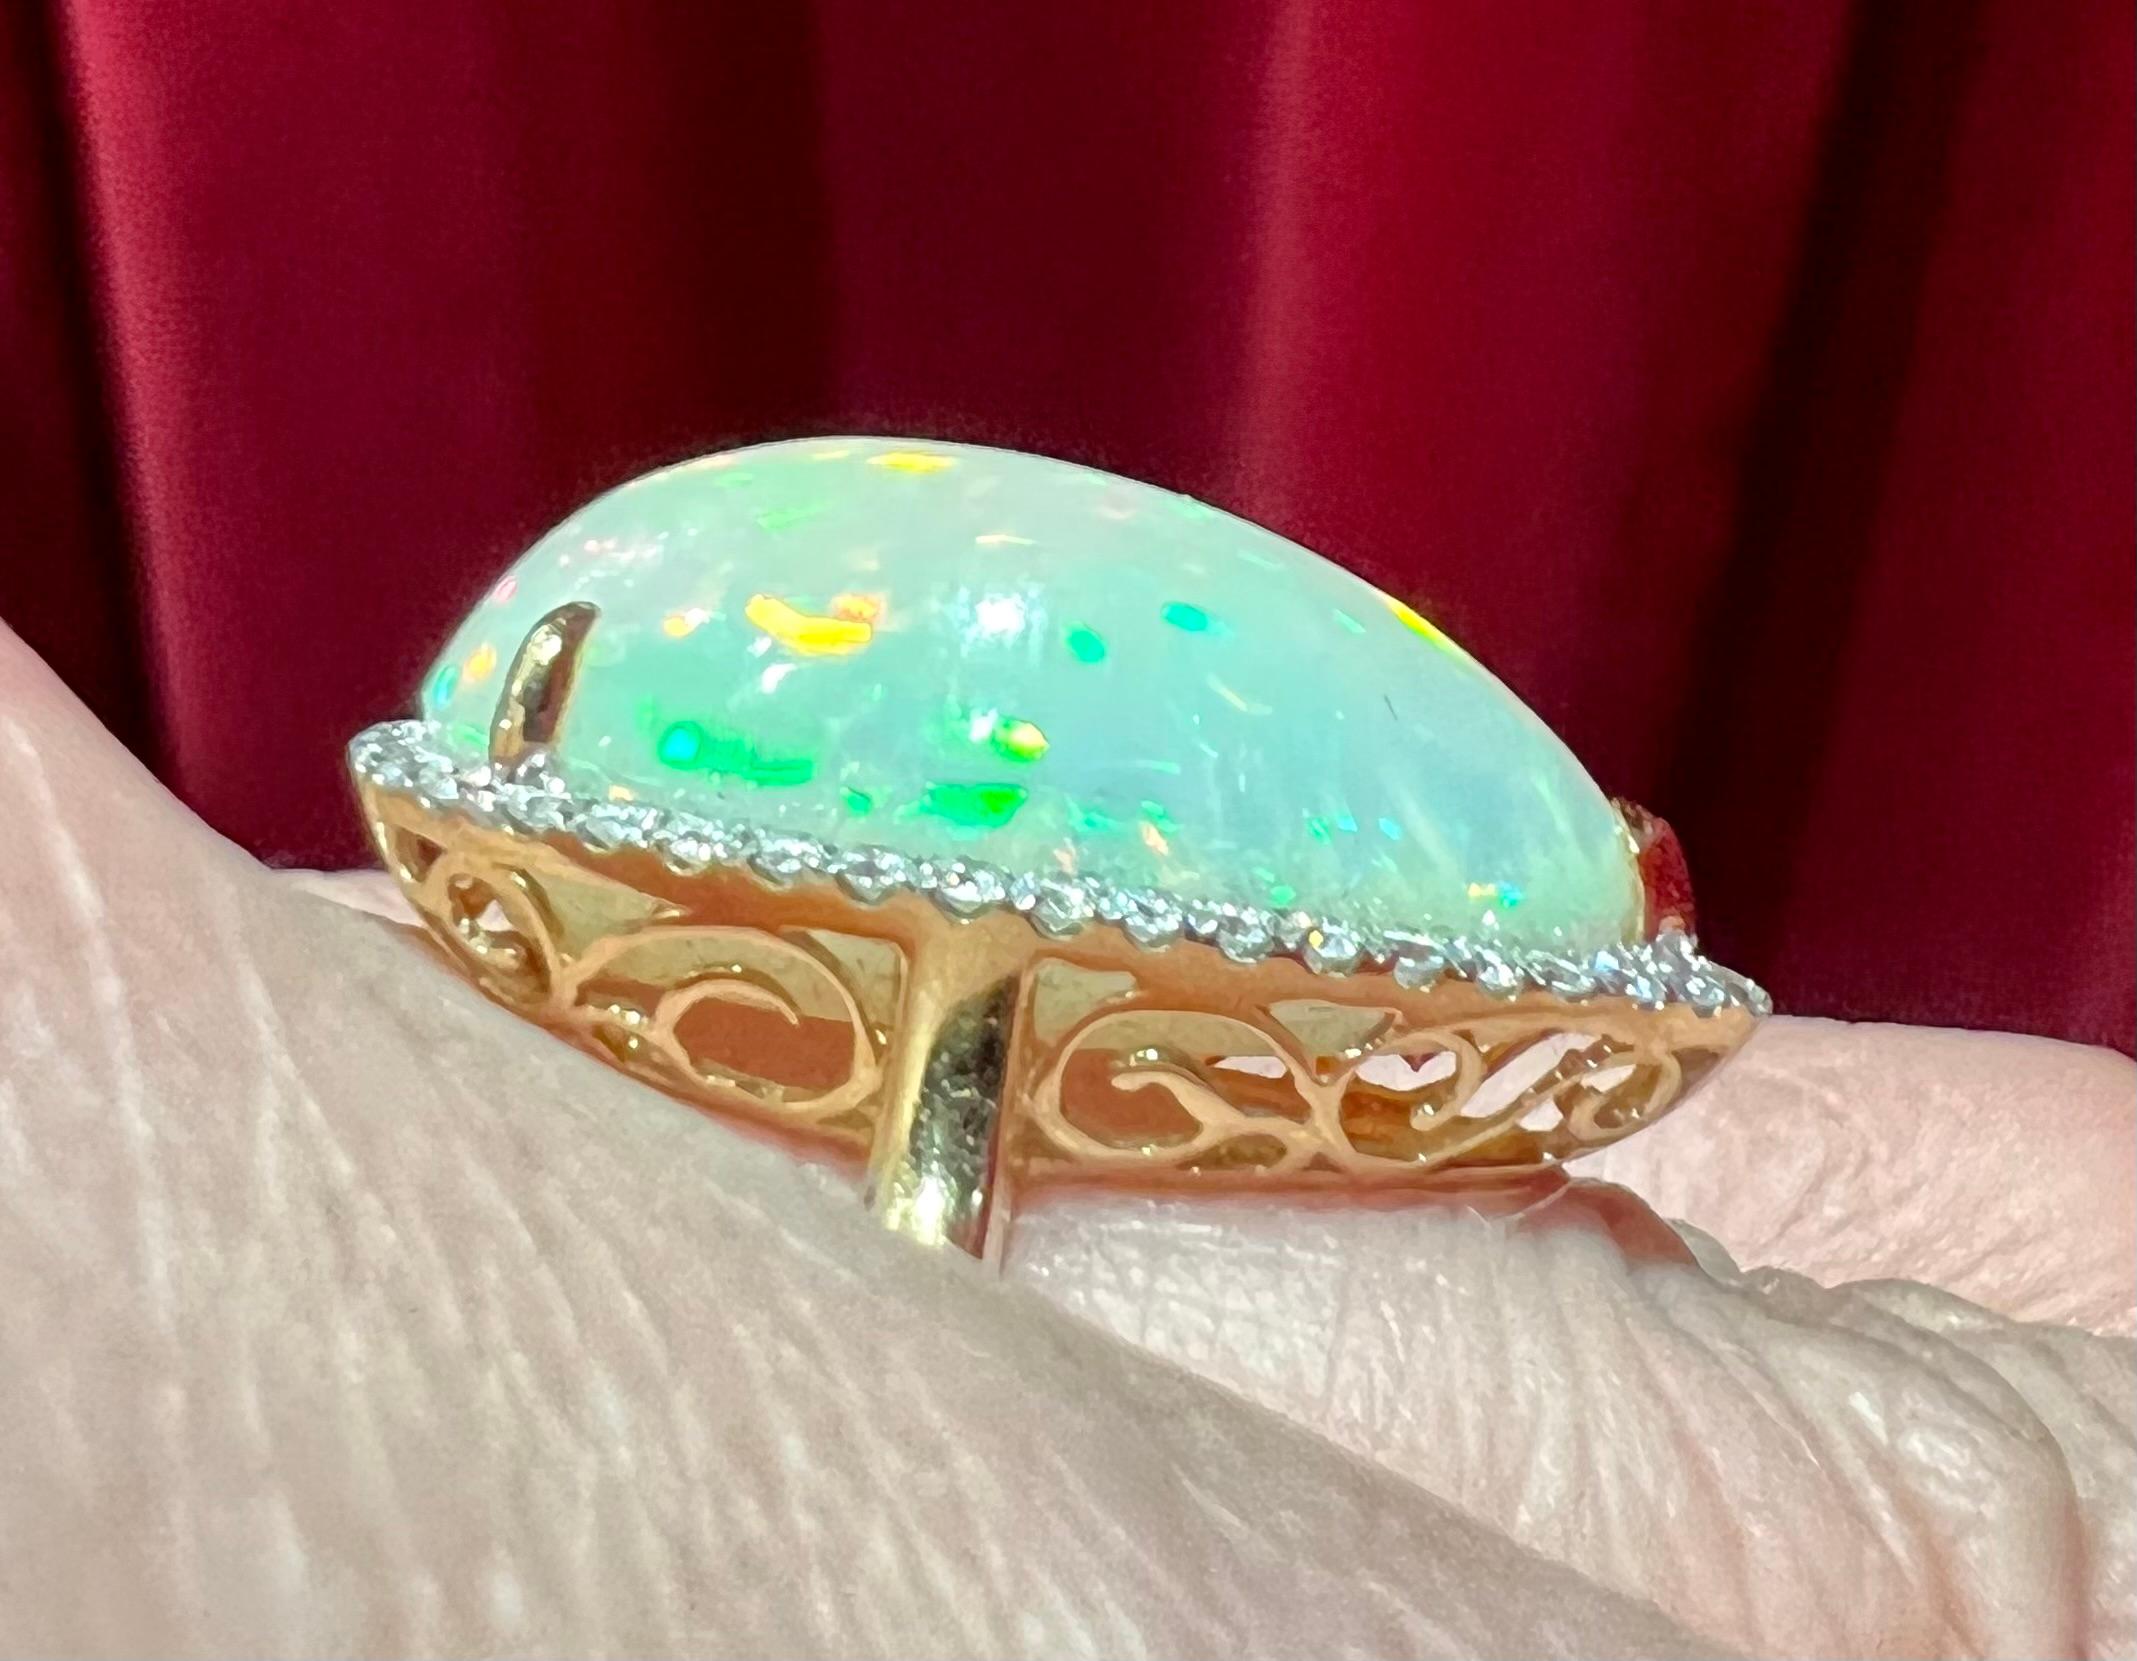 Superb ring in 18ct gold, yellow gold, set with an 8.72ct pear-shaped cabochon opal surrounded by pavé diamonds for approximately 0.31ct in total. size 53 opal, length: 2.2cm at the widest: 1.5cm approximately discount to size 